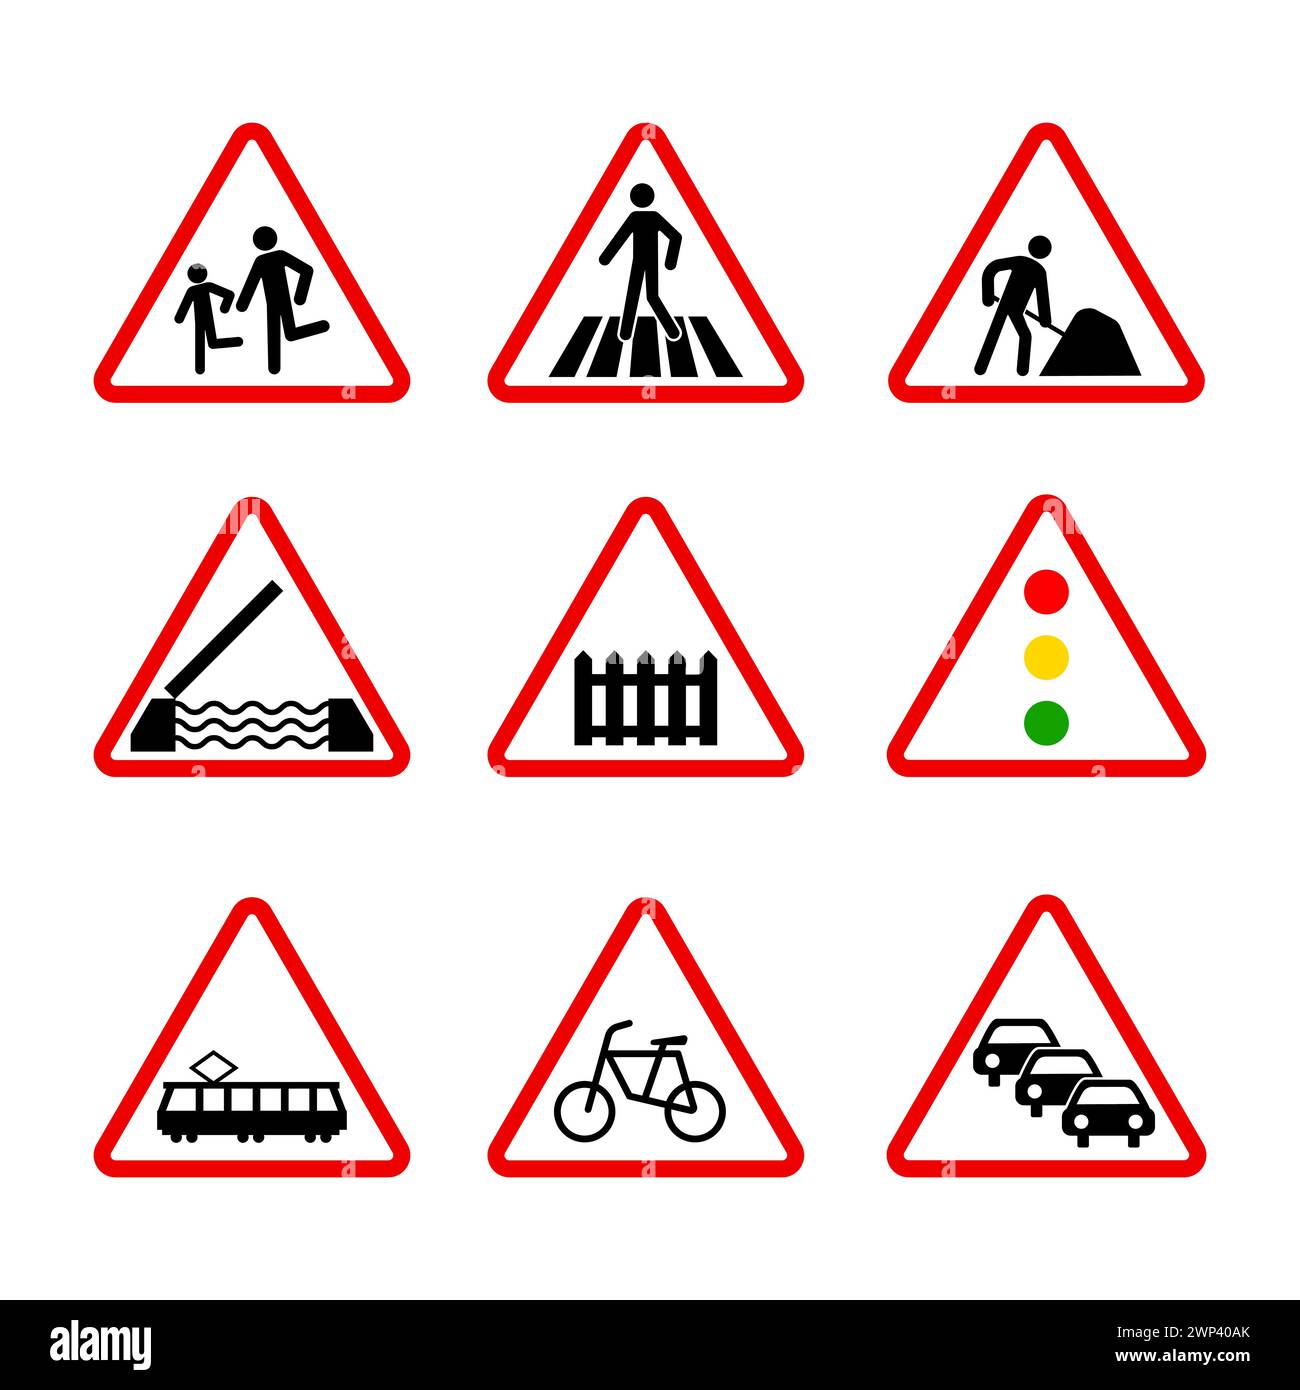 Priority road signs. Mandatory road signs. Traffic Laws. Vector illustration. stock image. EPS 10. Stock Vector